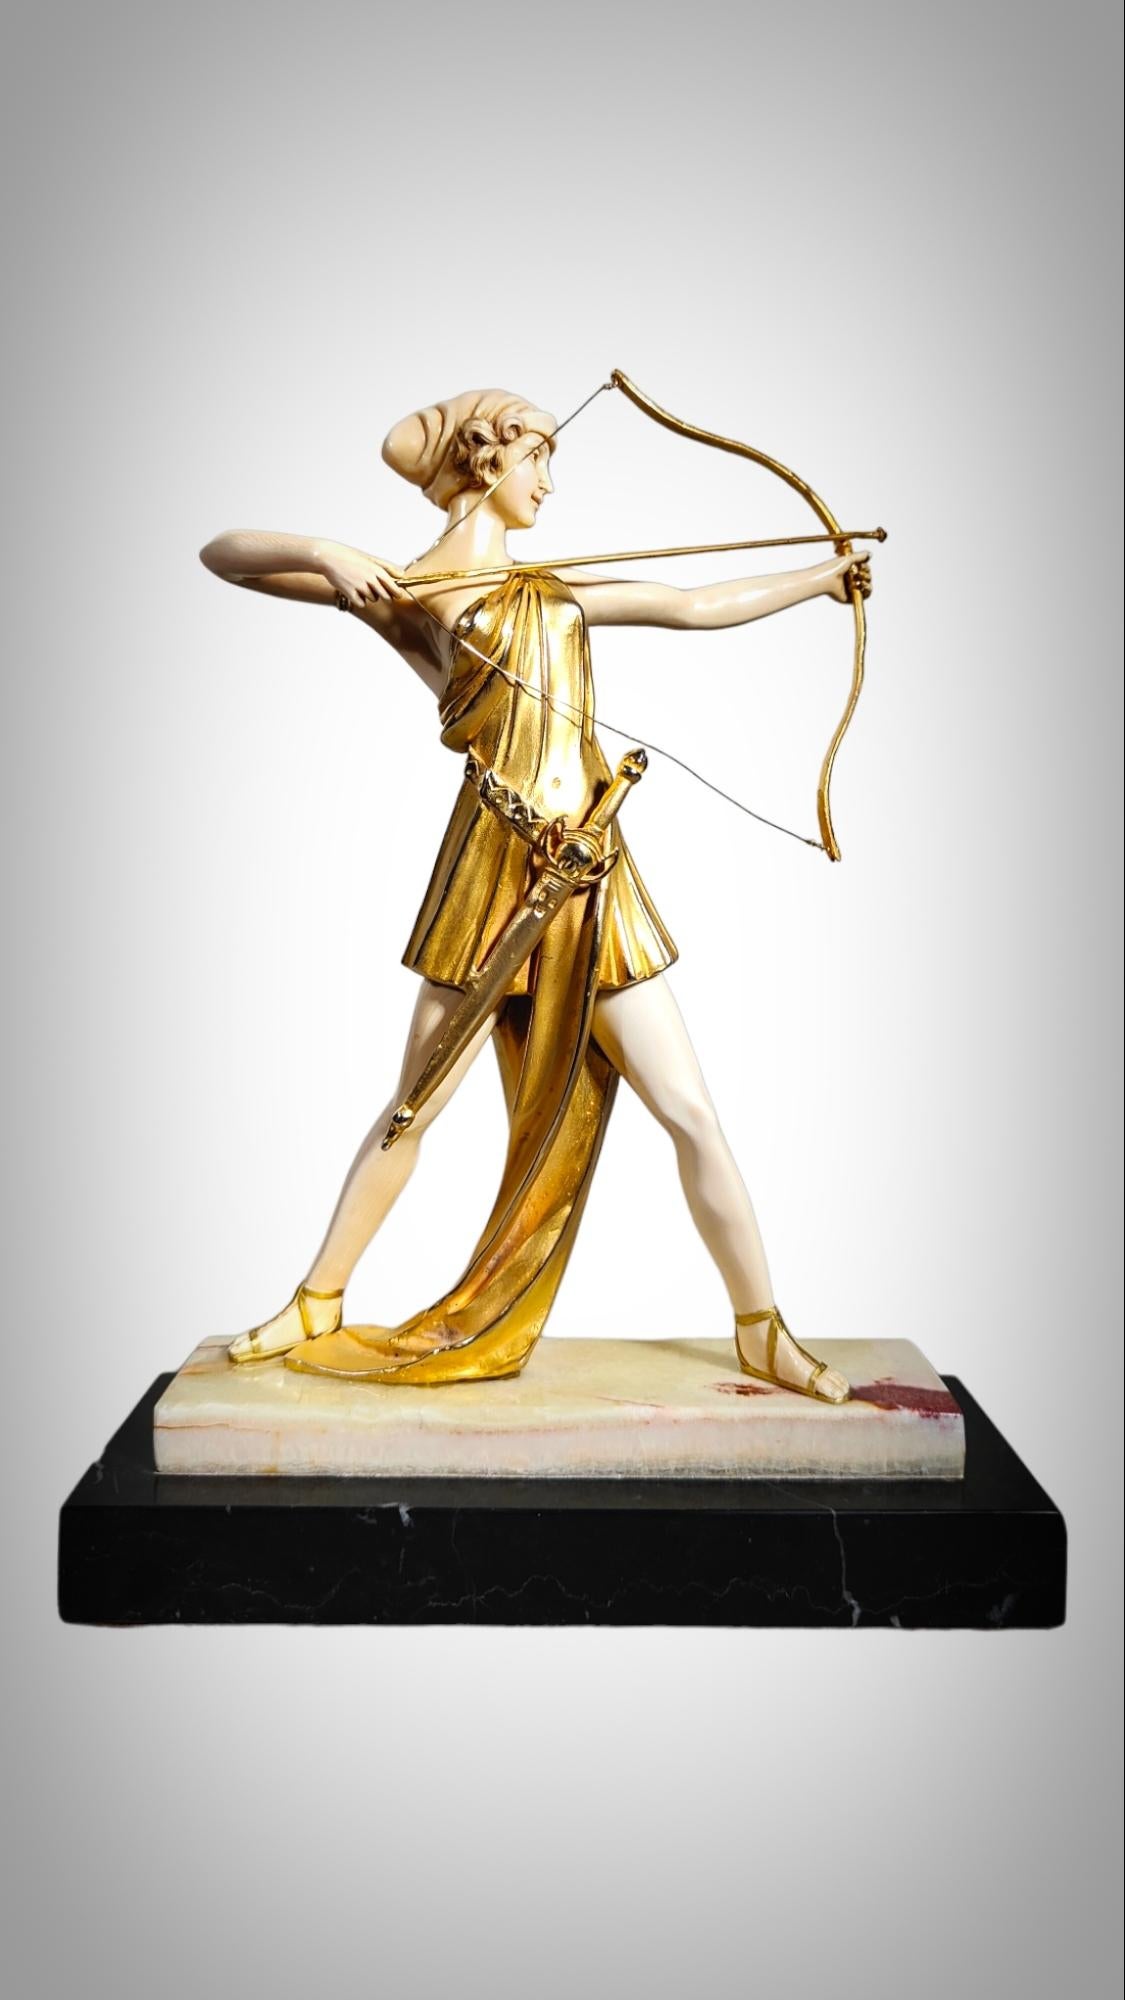 Chryselephantine sculpture, gilded bronze  resting on an onyx base, representing Diana
A magnificent early 20th century Art Deco chryselephantine figure of a beautiful young woman shooting her bow and arrows with a classic gilded bronze raised on an